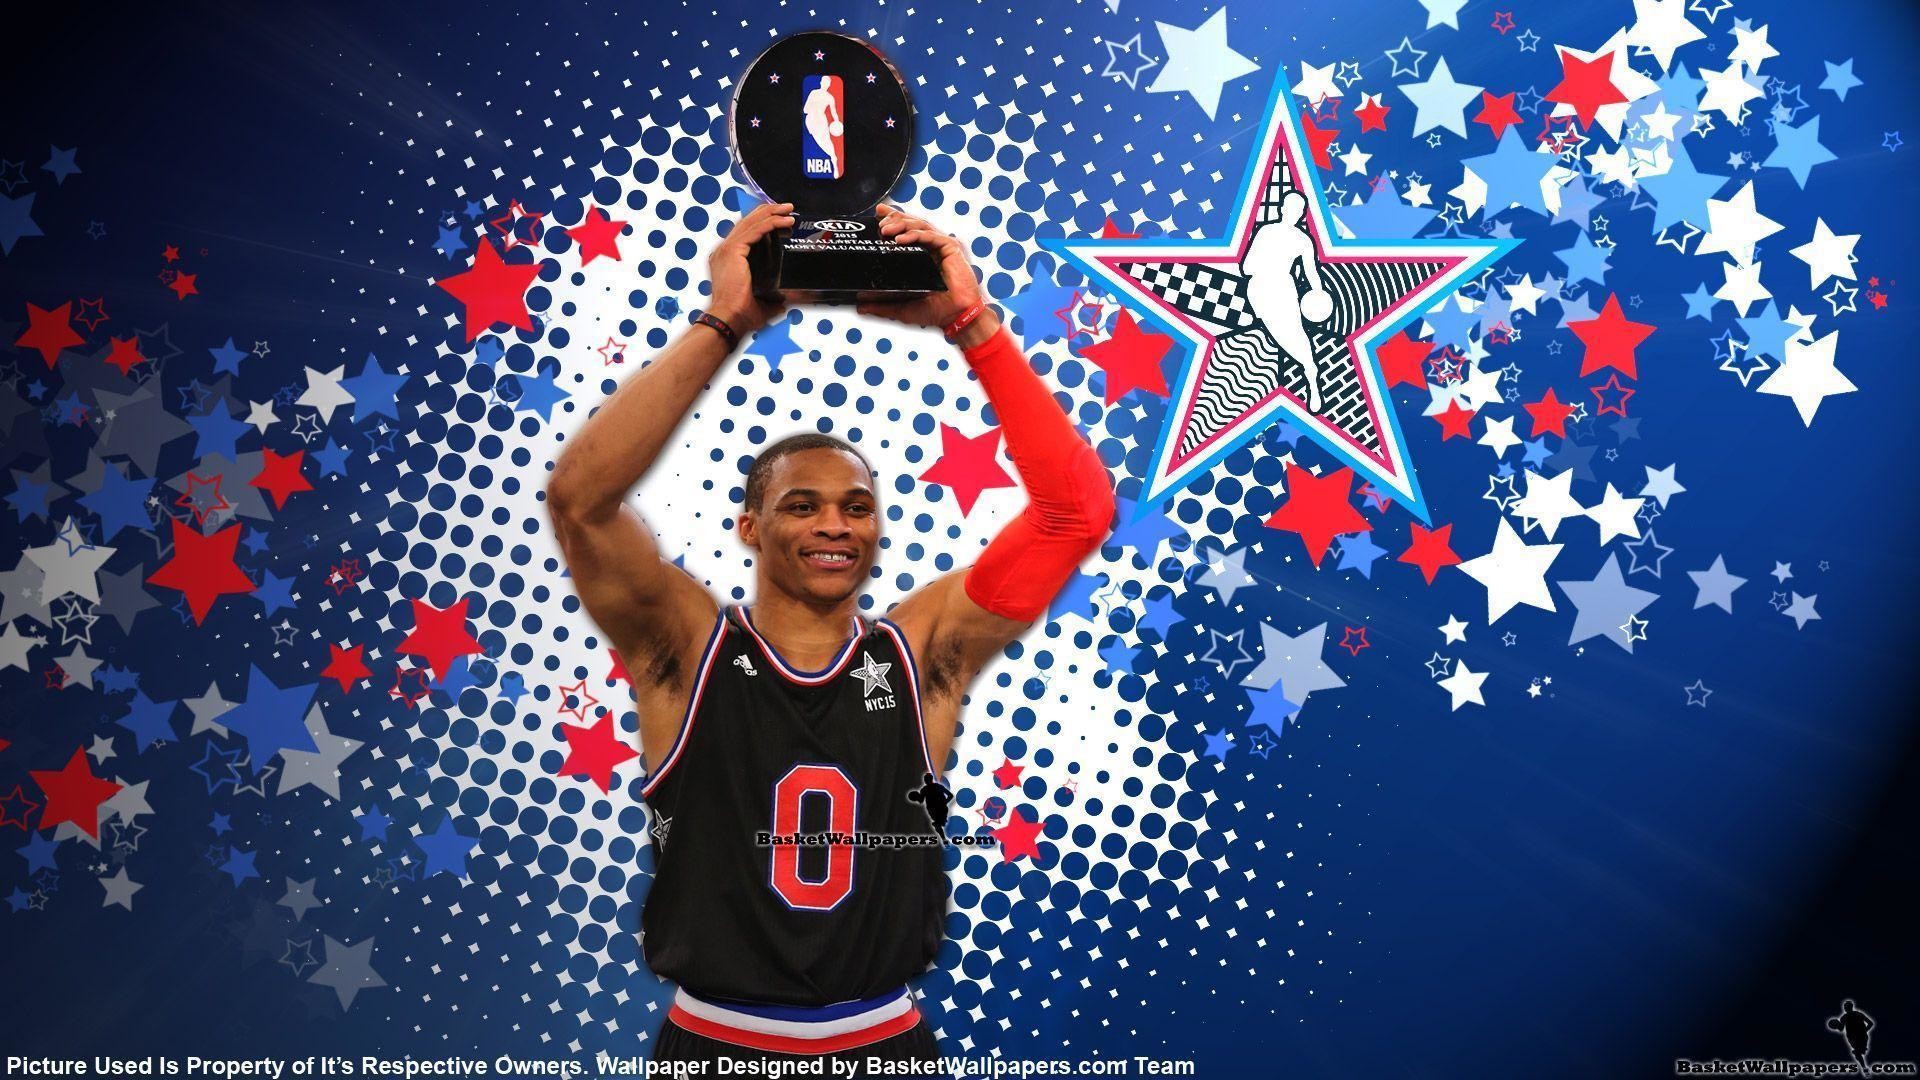 1920x1080 Russell Westbrook Wallpapers | Basketball Wallpapers at .